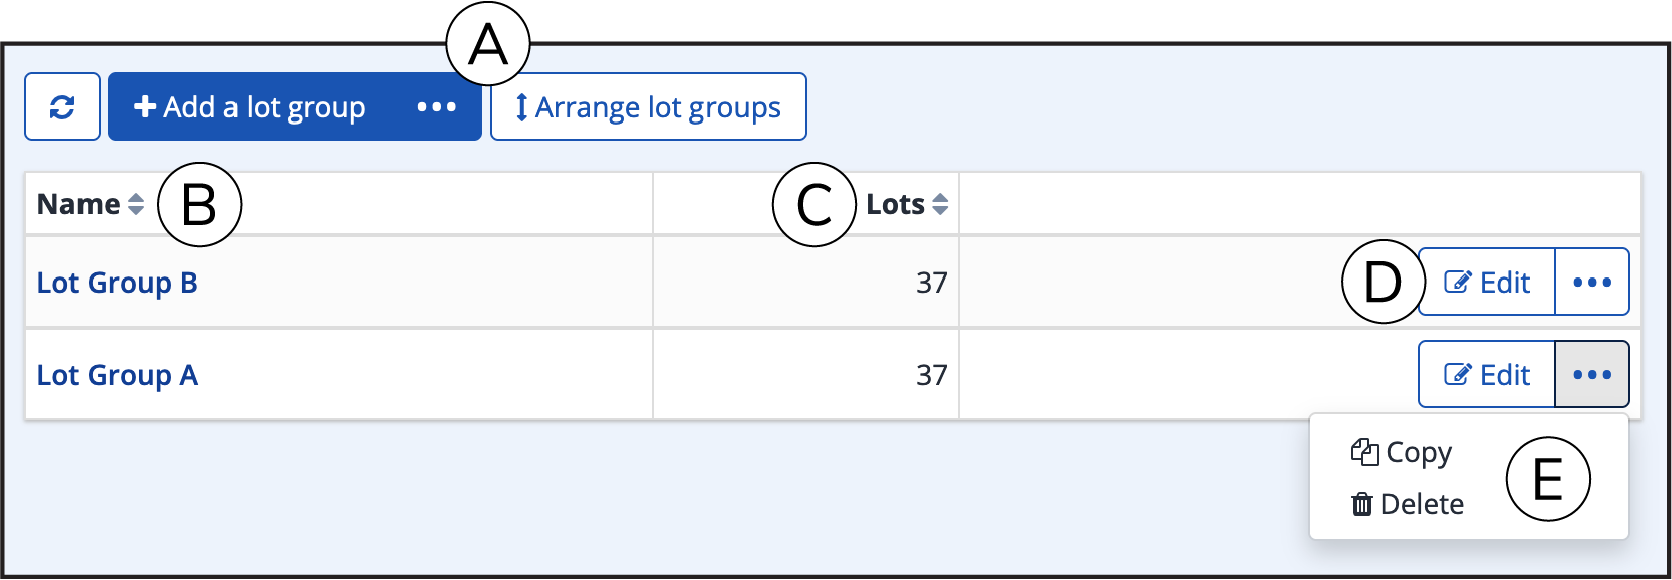 Lot Groups page.png